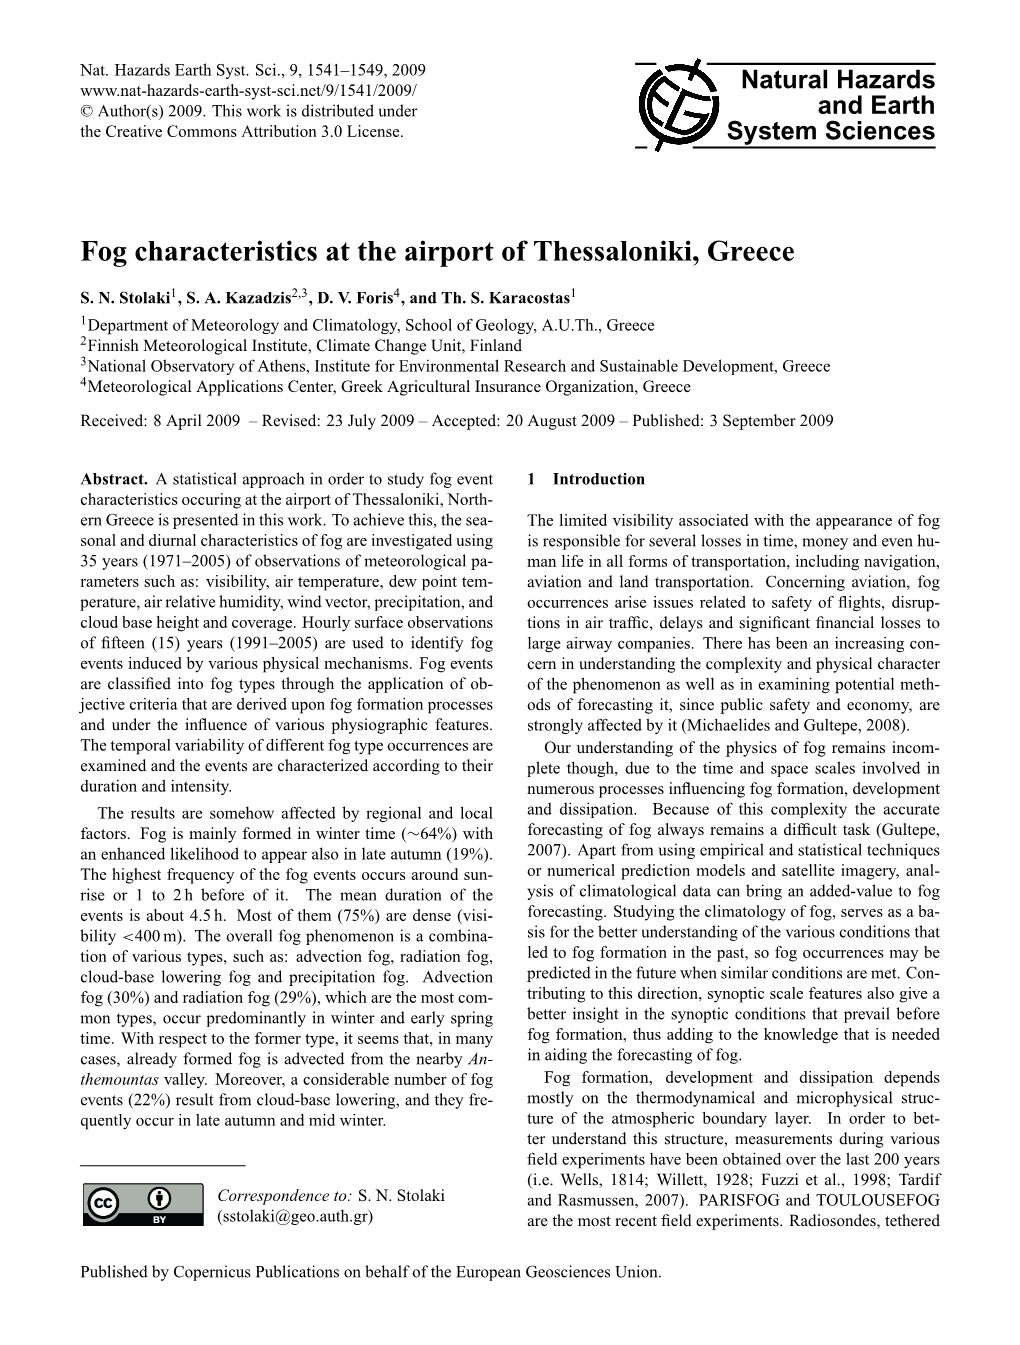 Fog Characteristics at the Airport of Thessaloniki, Greece